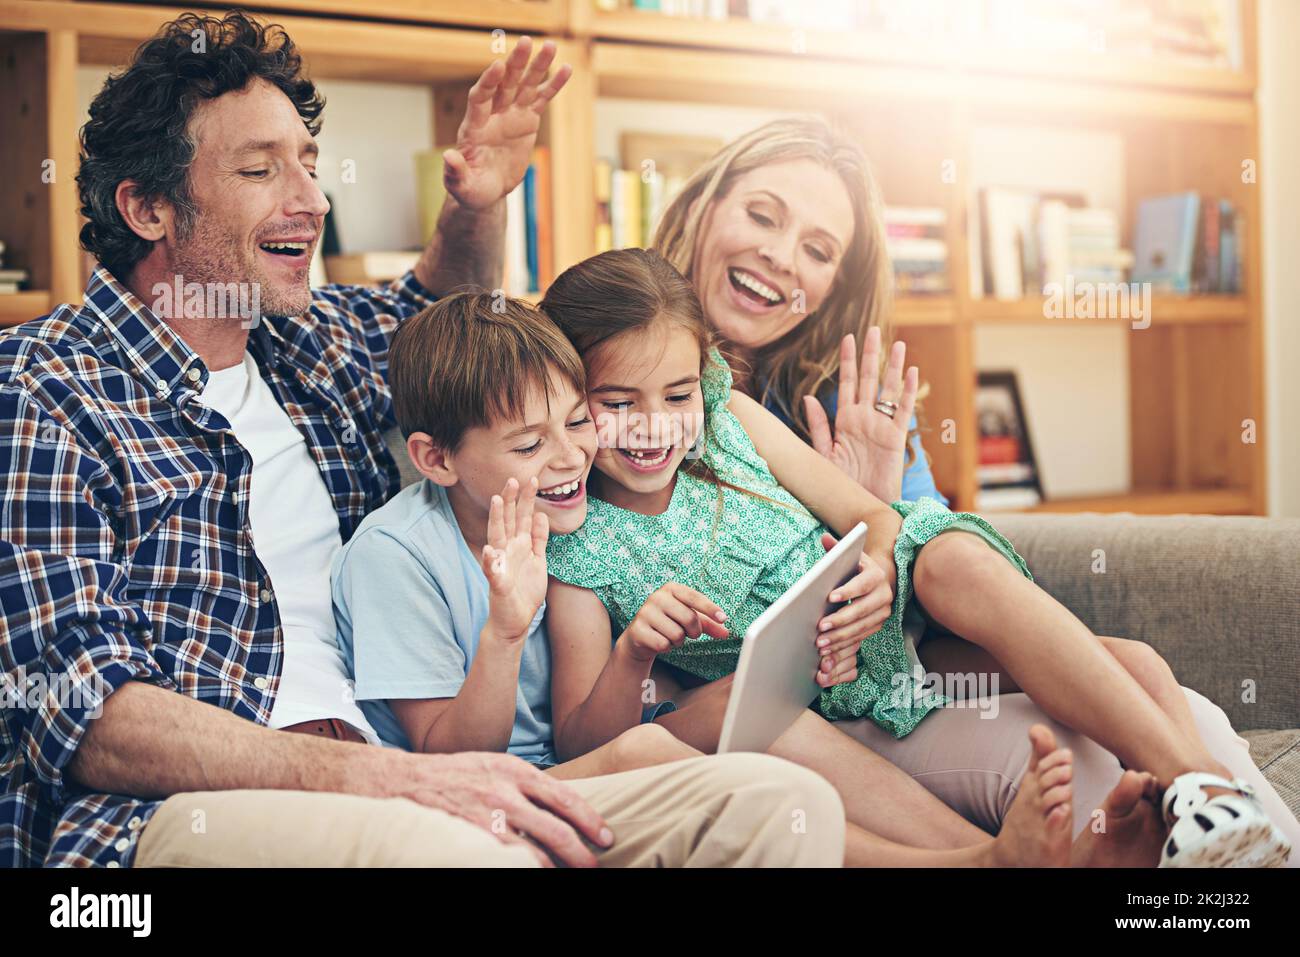 Connecting across borders with smart technology. Shot of a happy family making a video call on their digital tablet together at home. Stock Photo